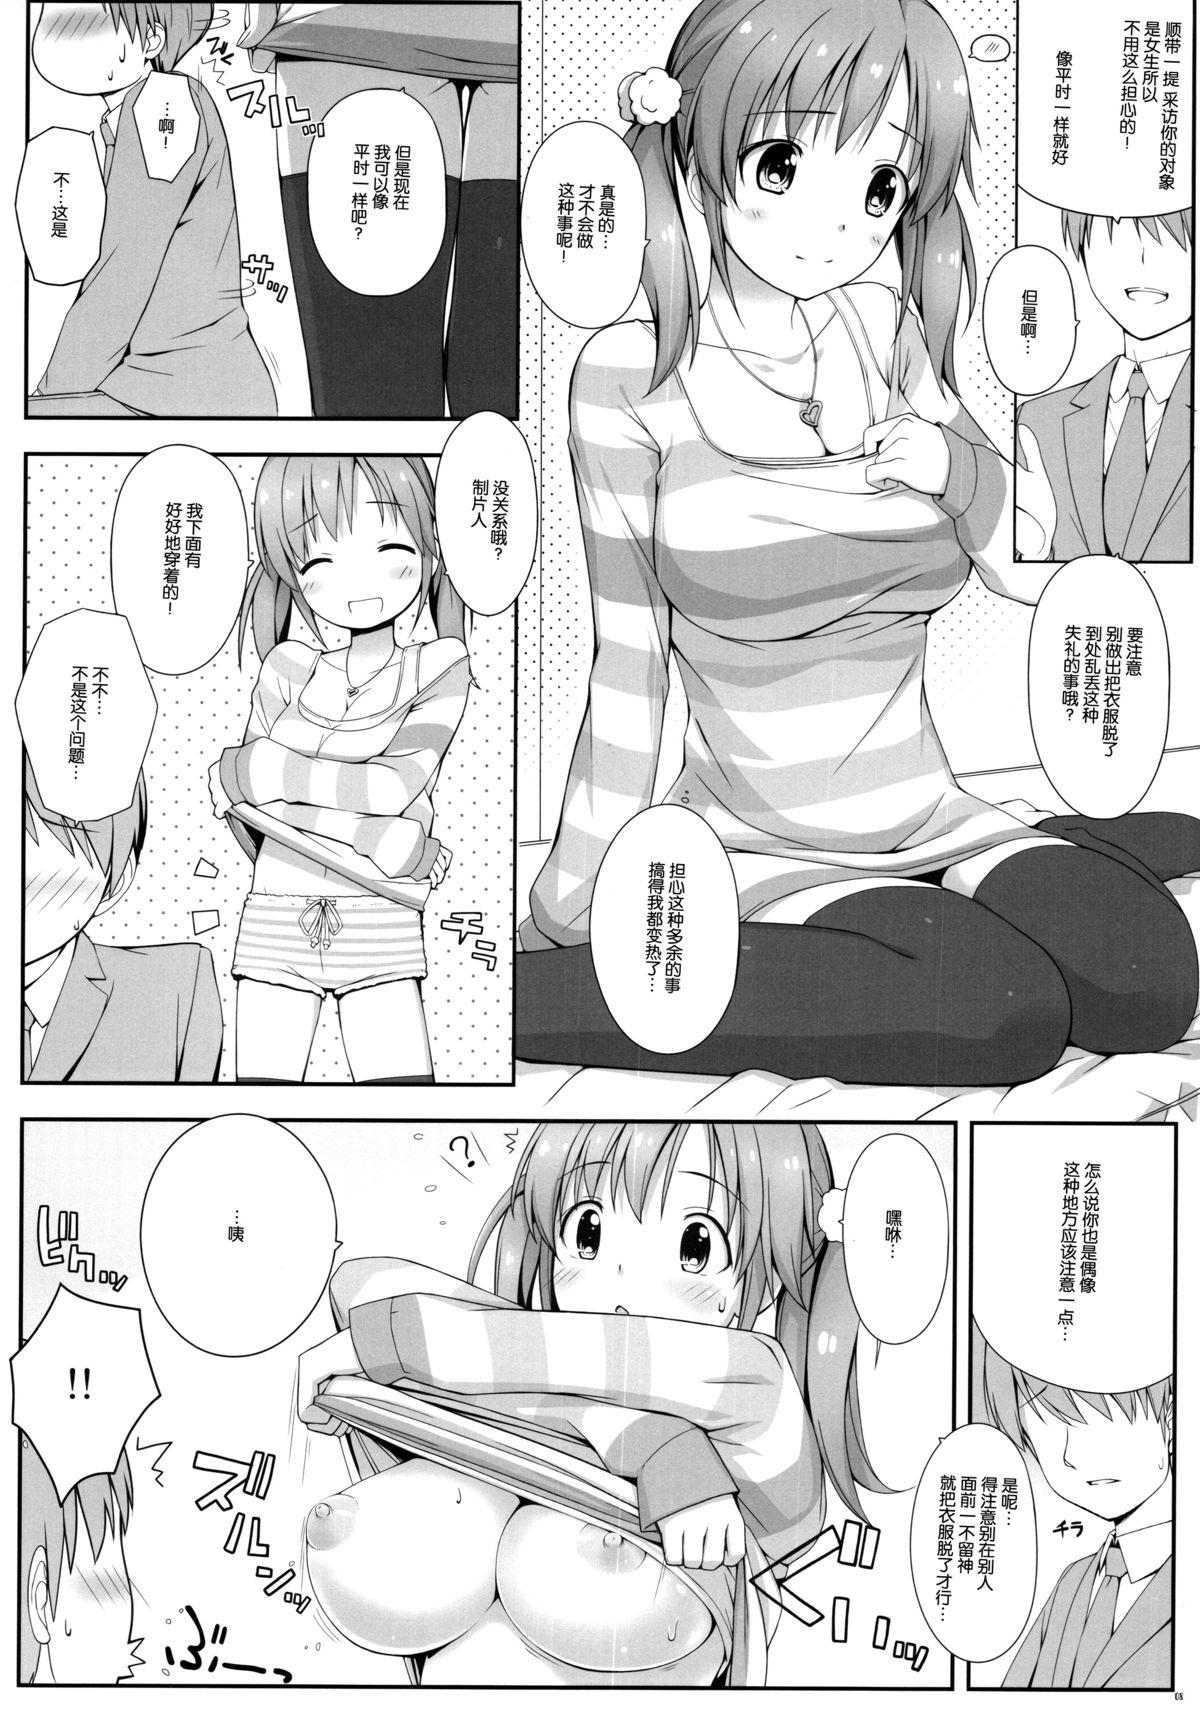 Sologirl BAD COMMUNICATION? 15 - The idolmaster Dirty Talk - Page 9